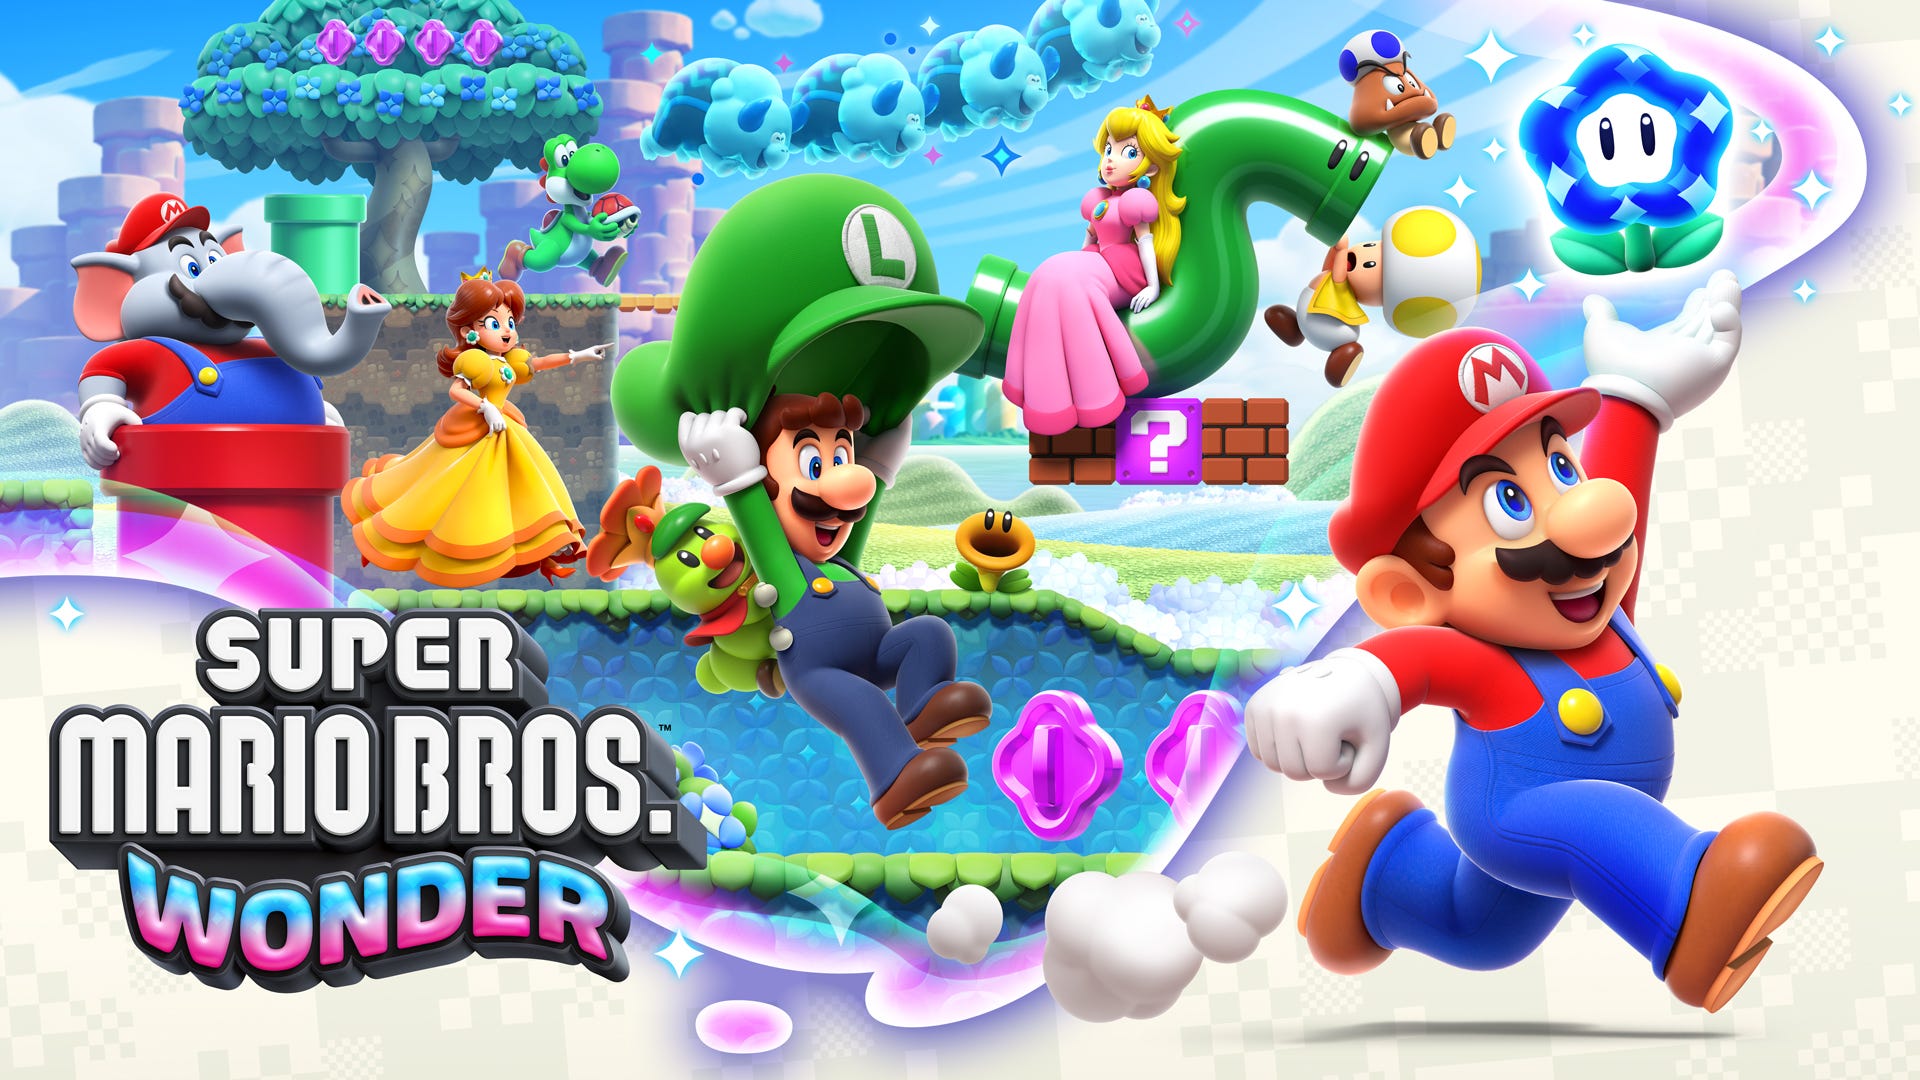 Super Mario Bros. Wonder – here’s all the details from the special Direct presentation